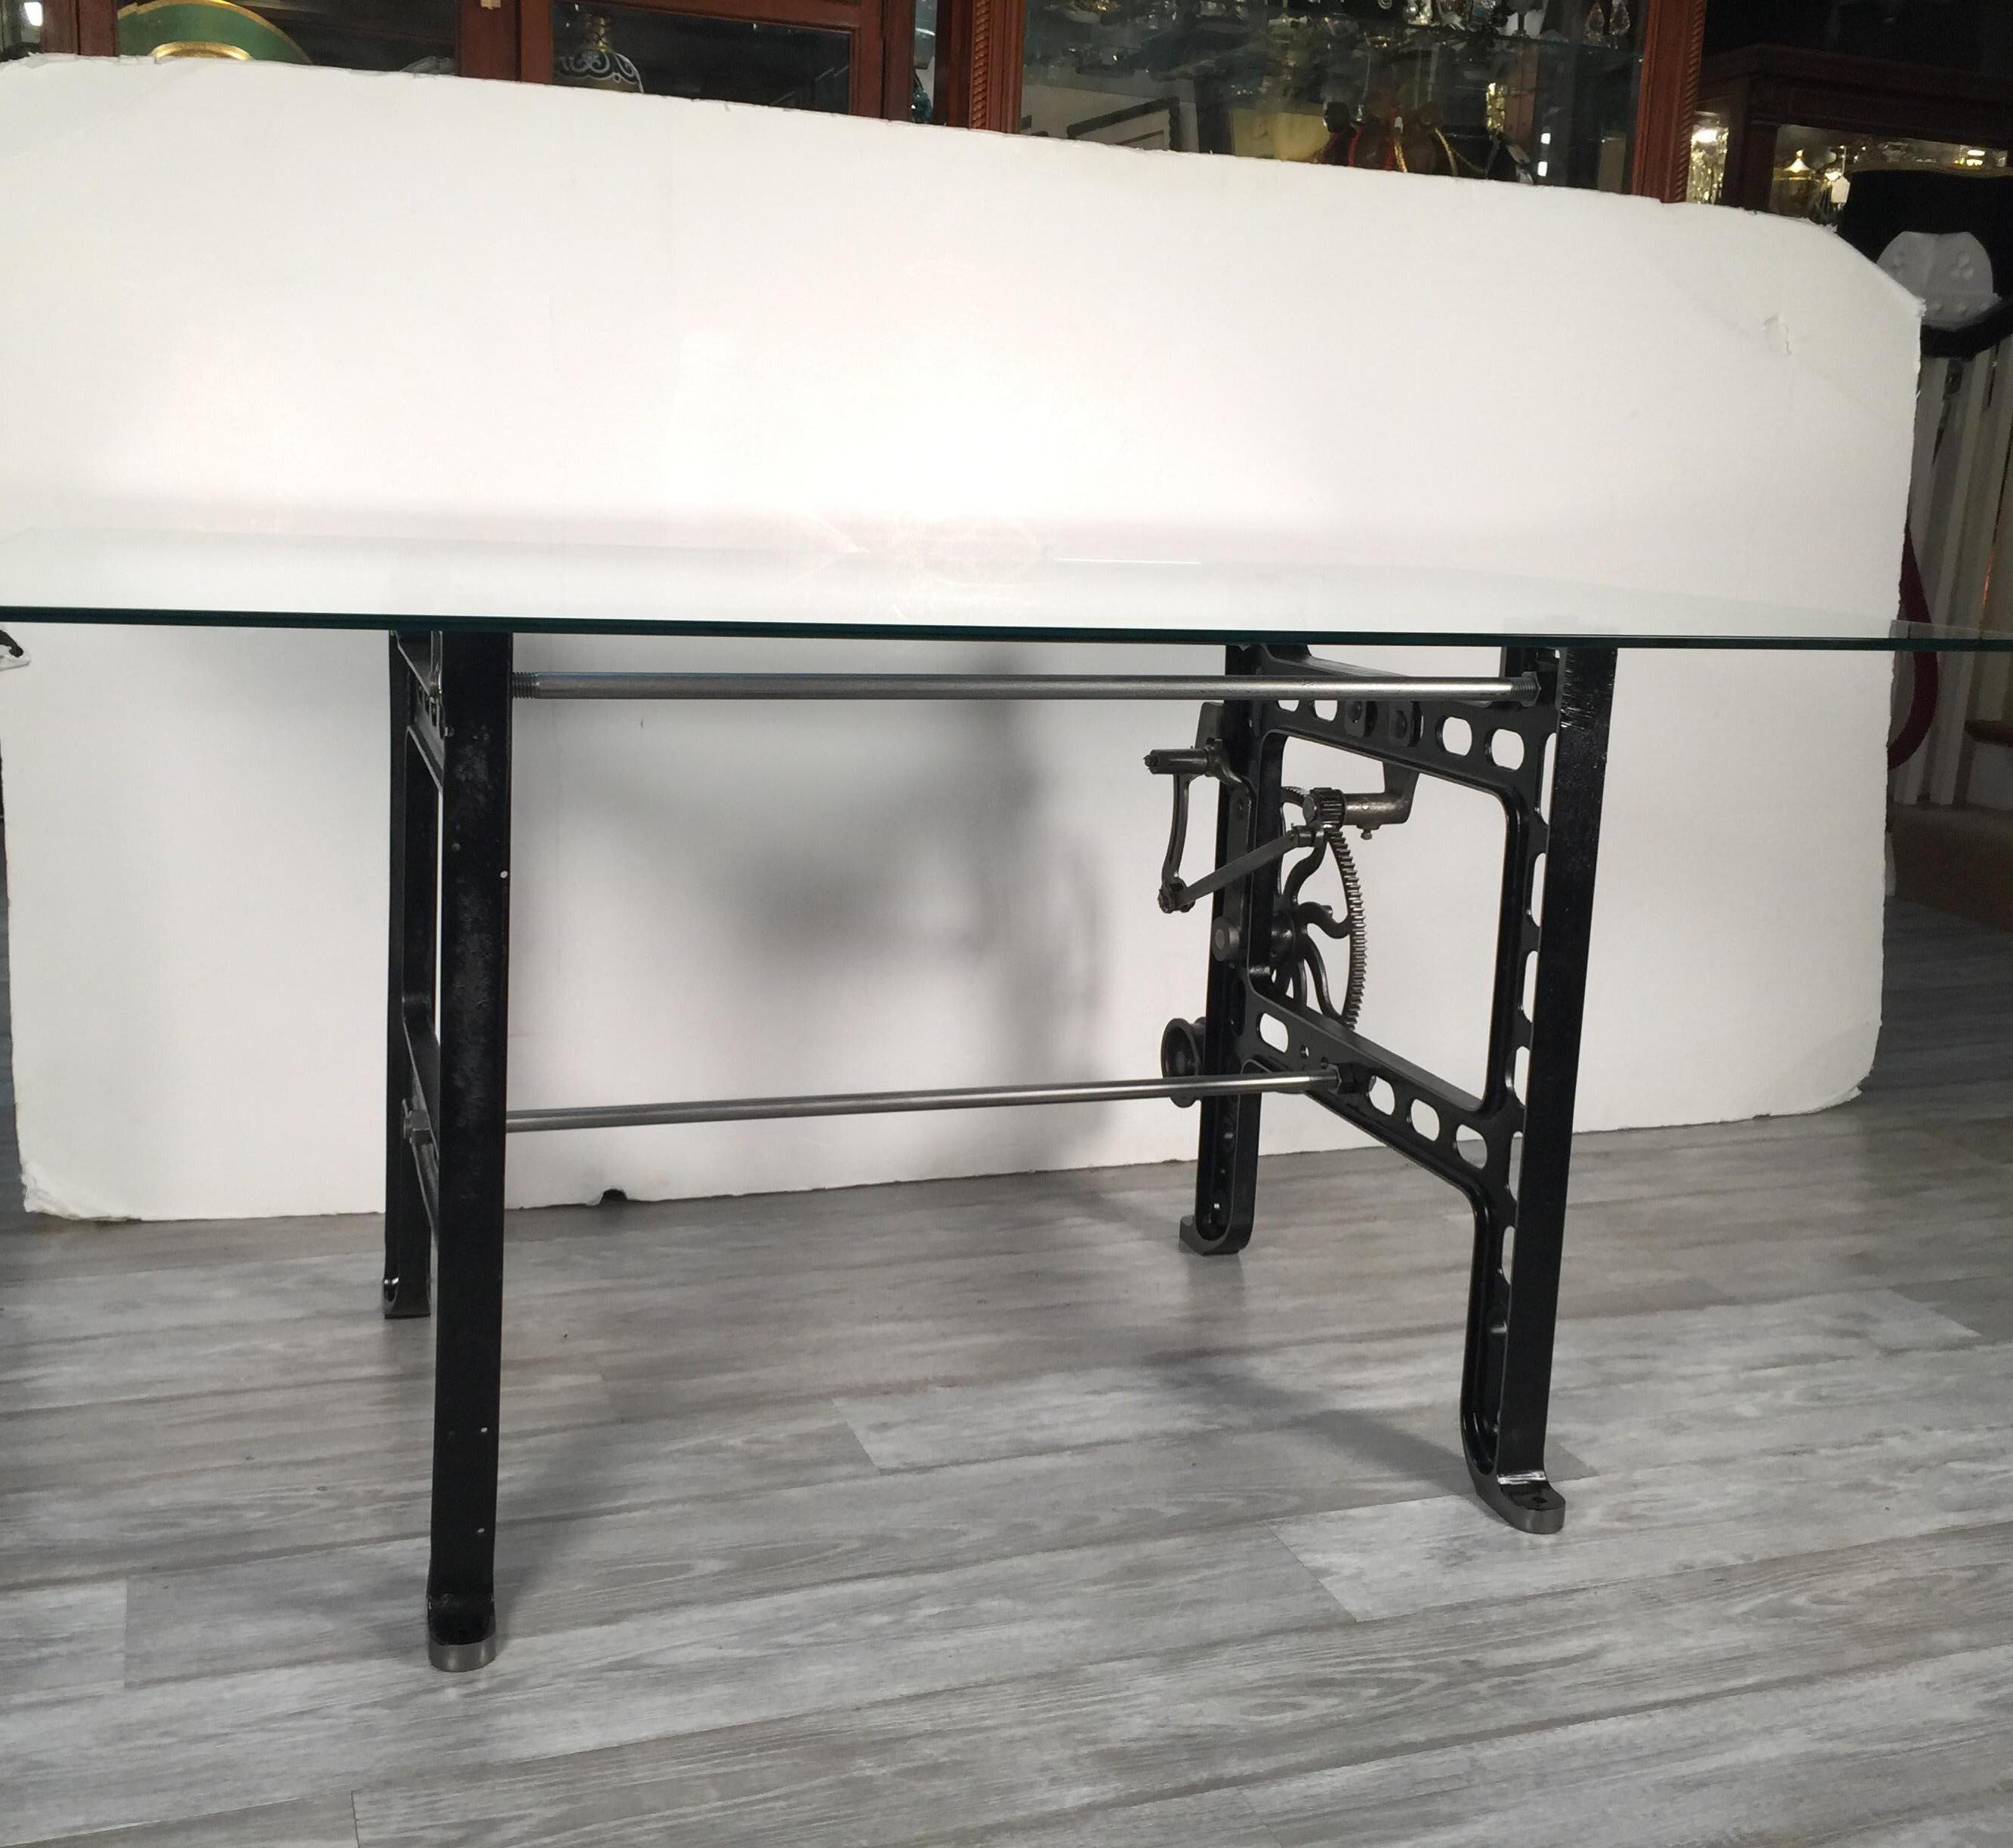 Original factory table base with gears has been restored to an outstanding desk or table. New glass tabletop is 60